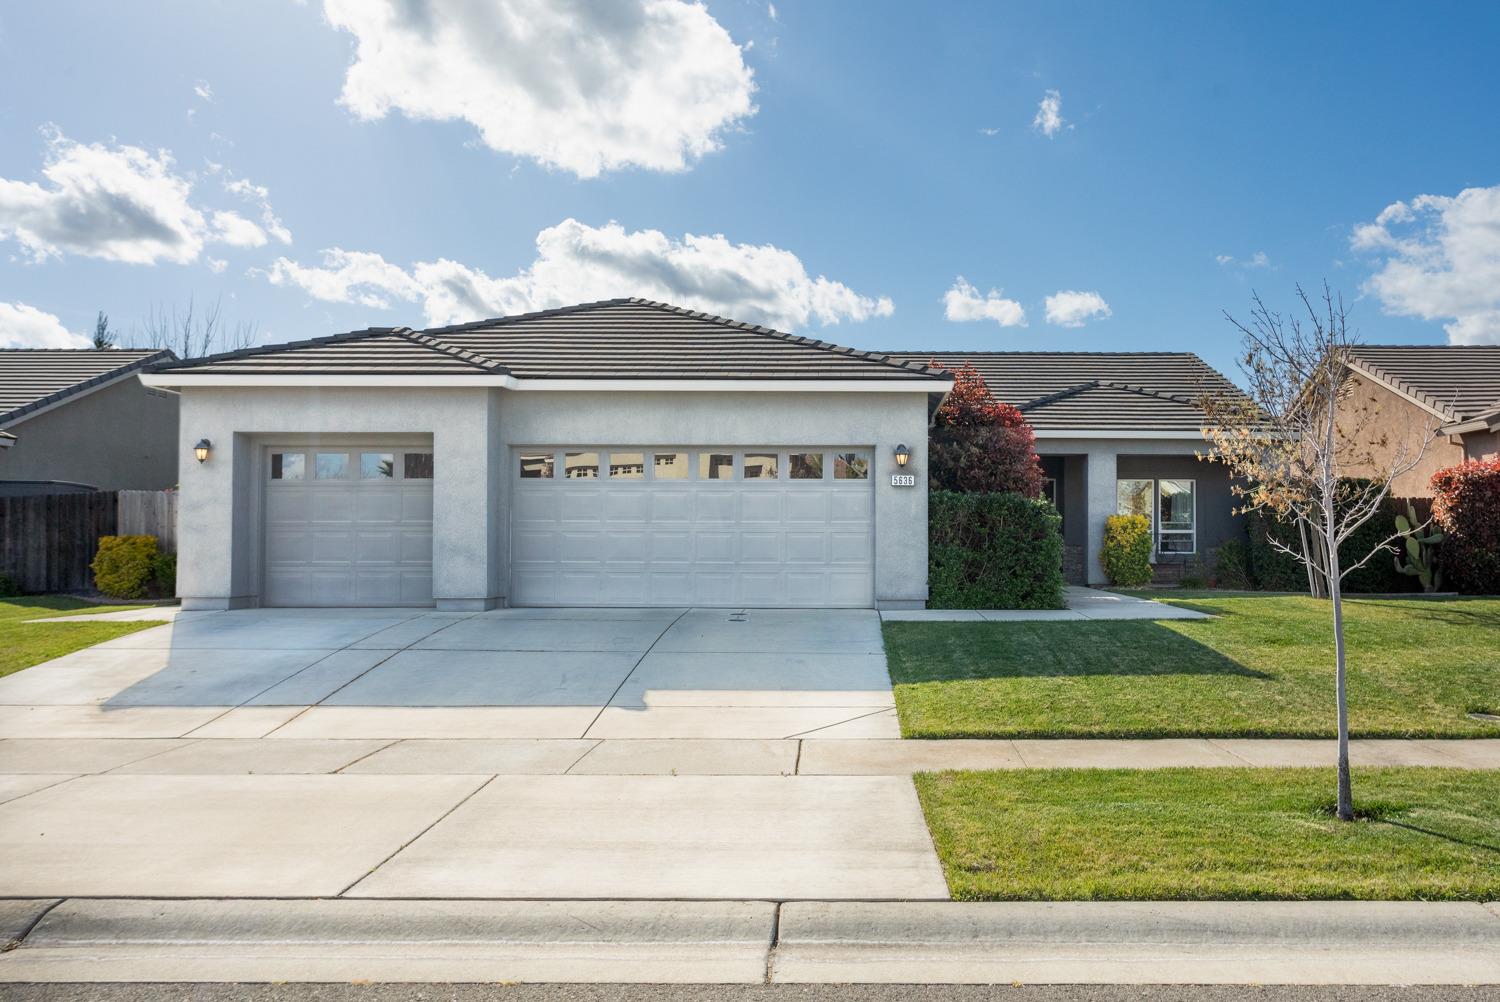 Photo of 5636 Gold River Wy in Marysville, CA